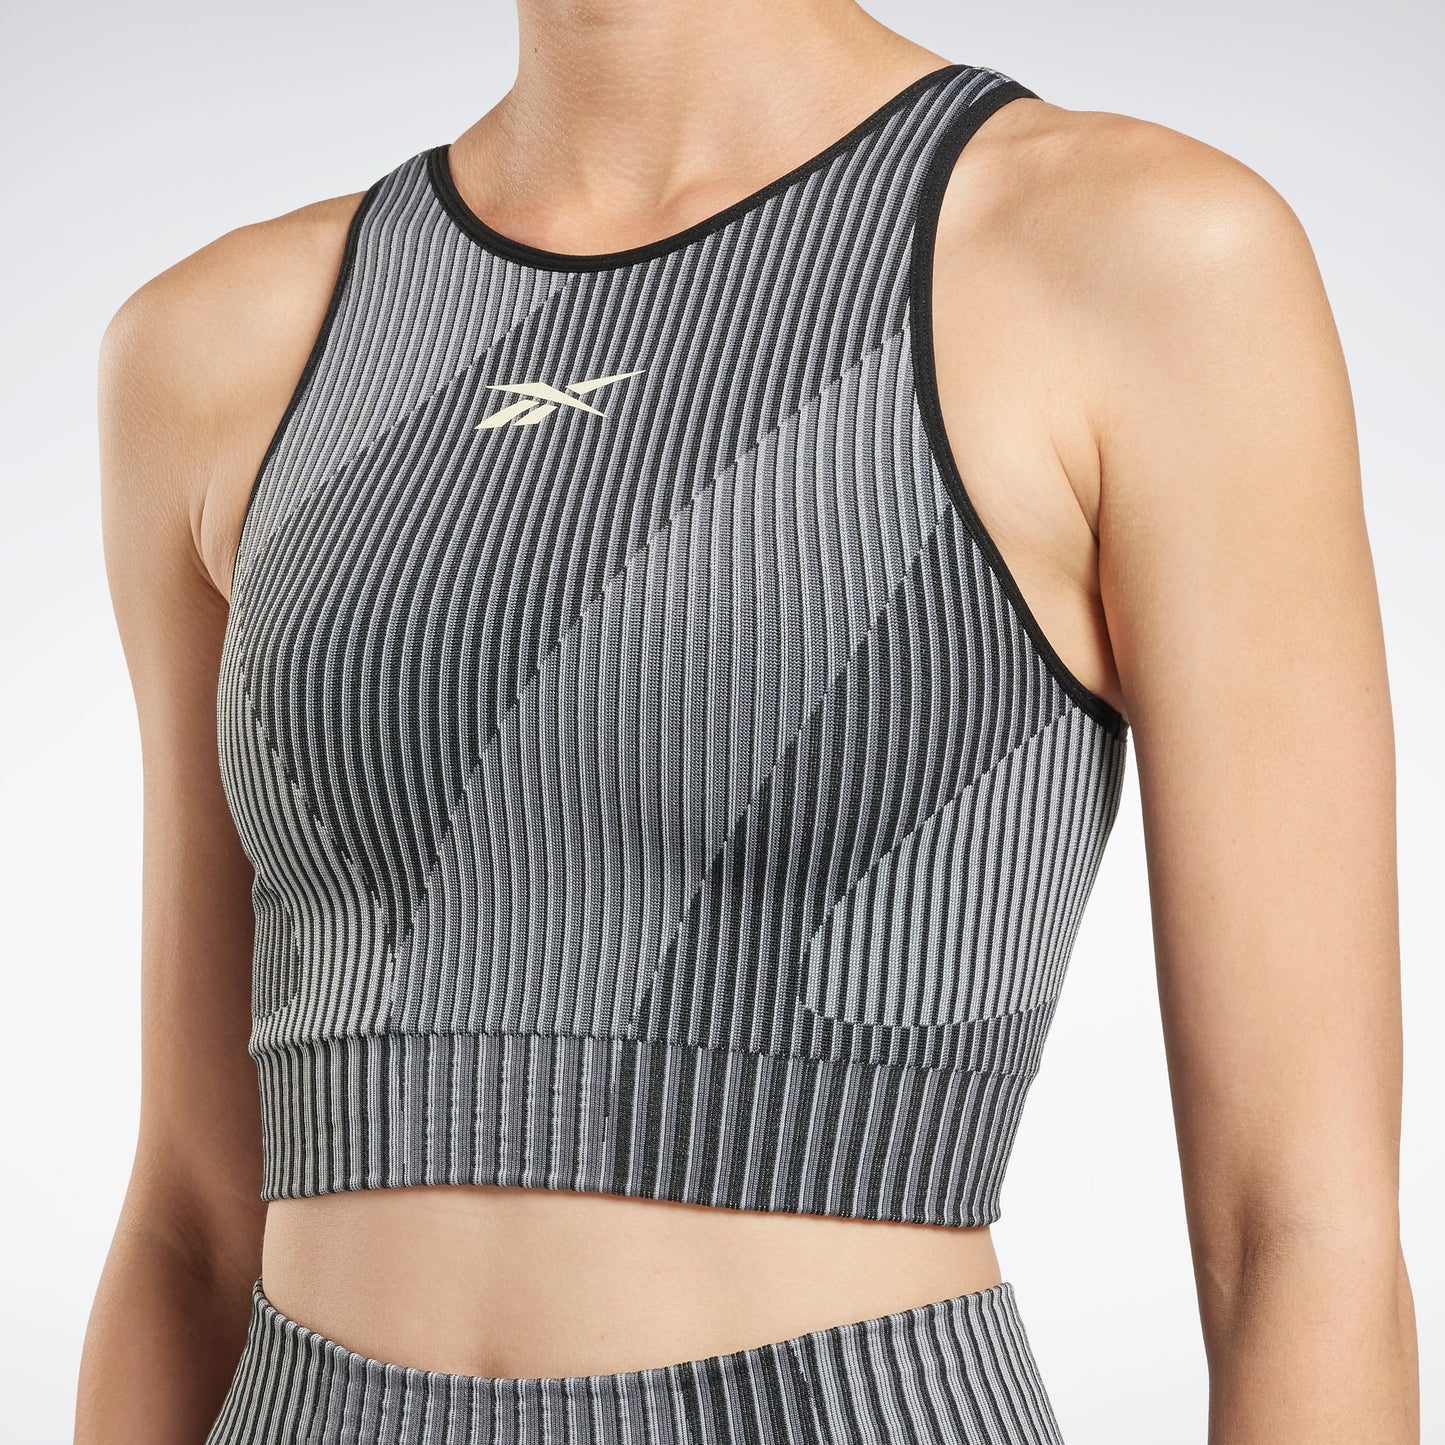 United By Fitness Myoknit Seamless Top Black